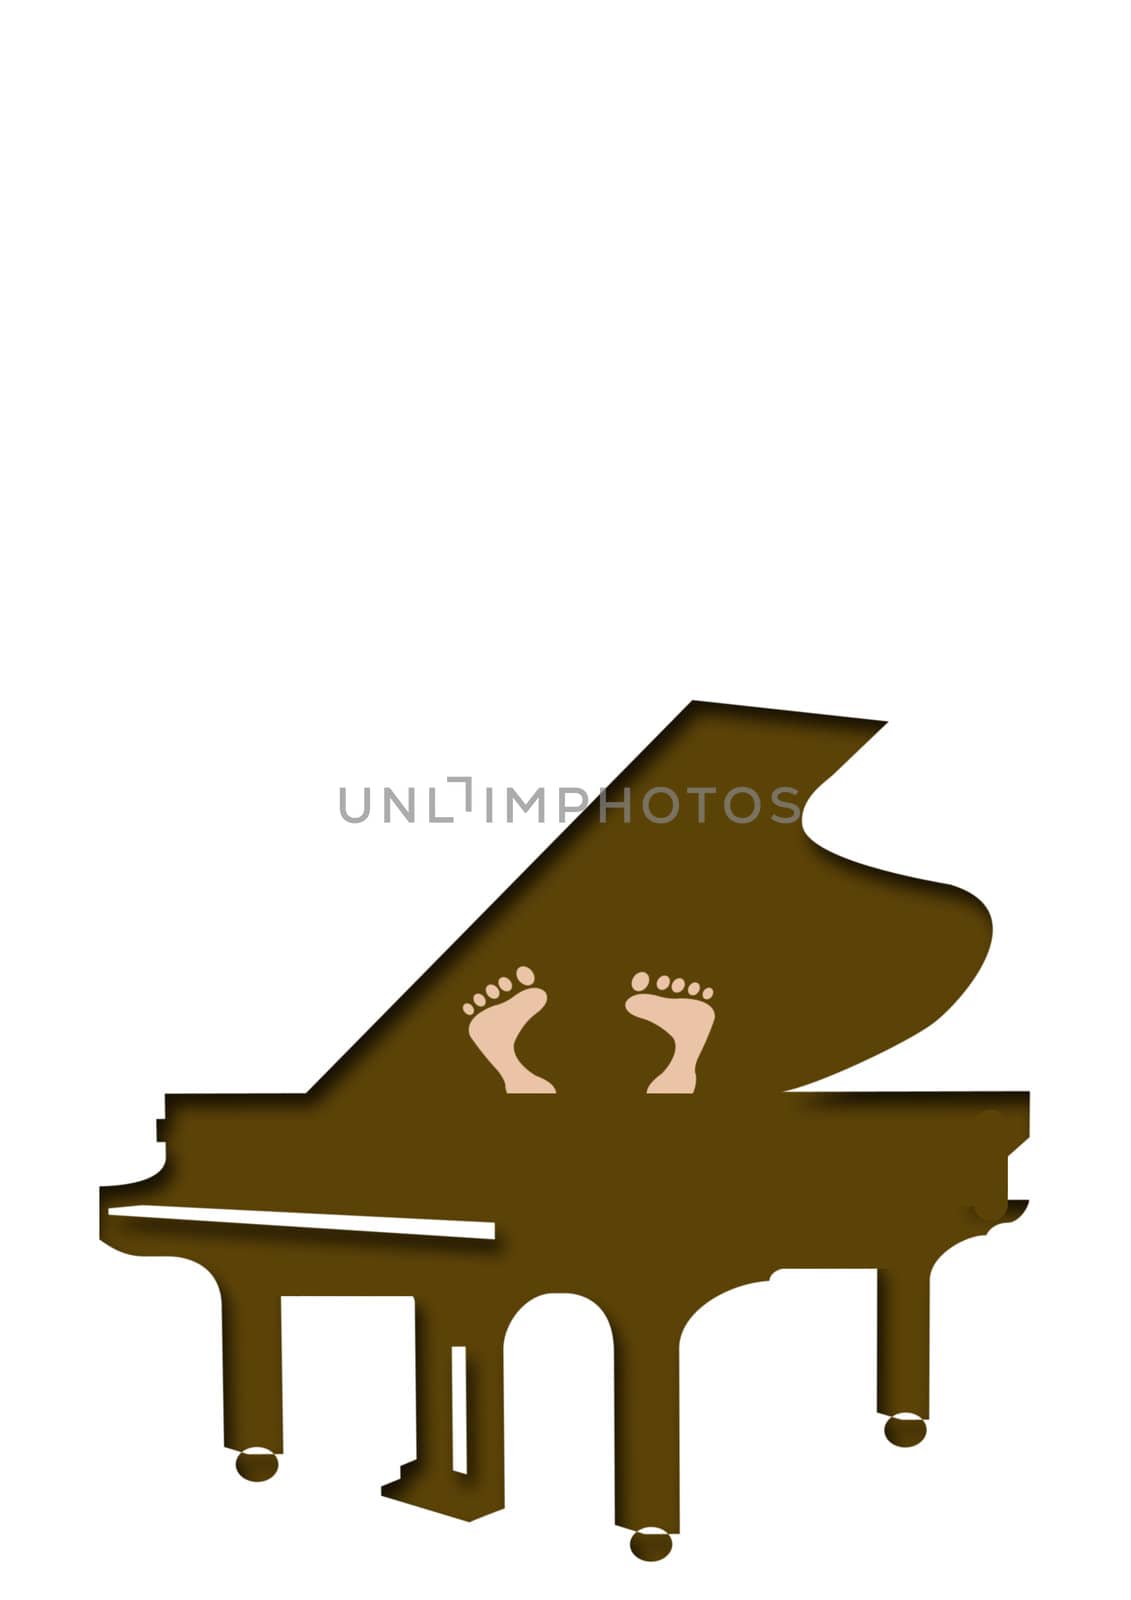 abstract creative symbolic comic image tired from a difficult concerto maestro